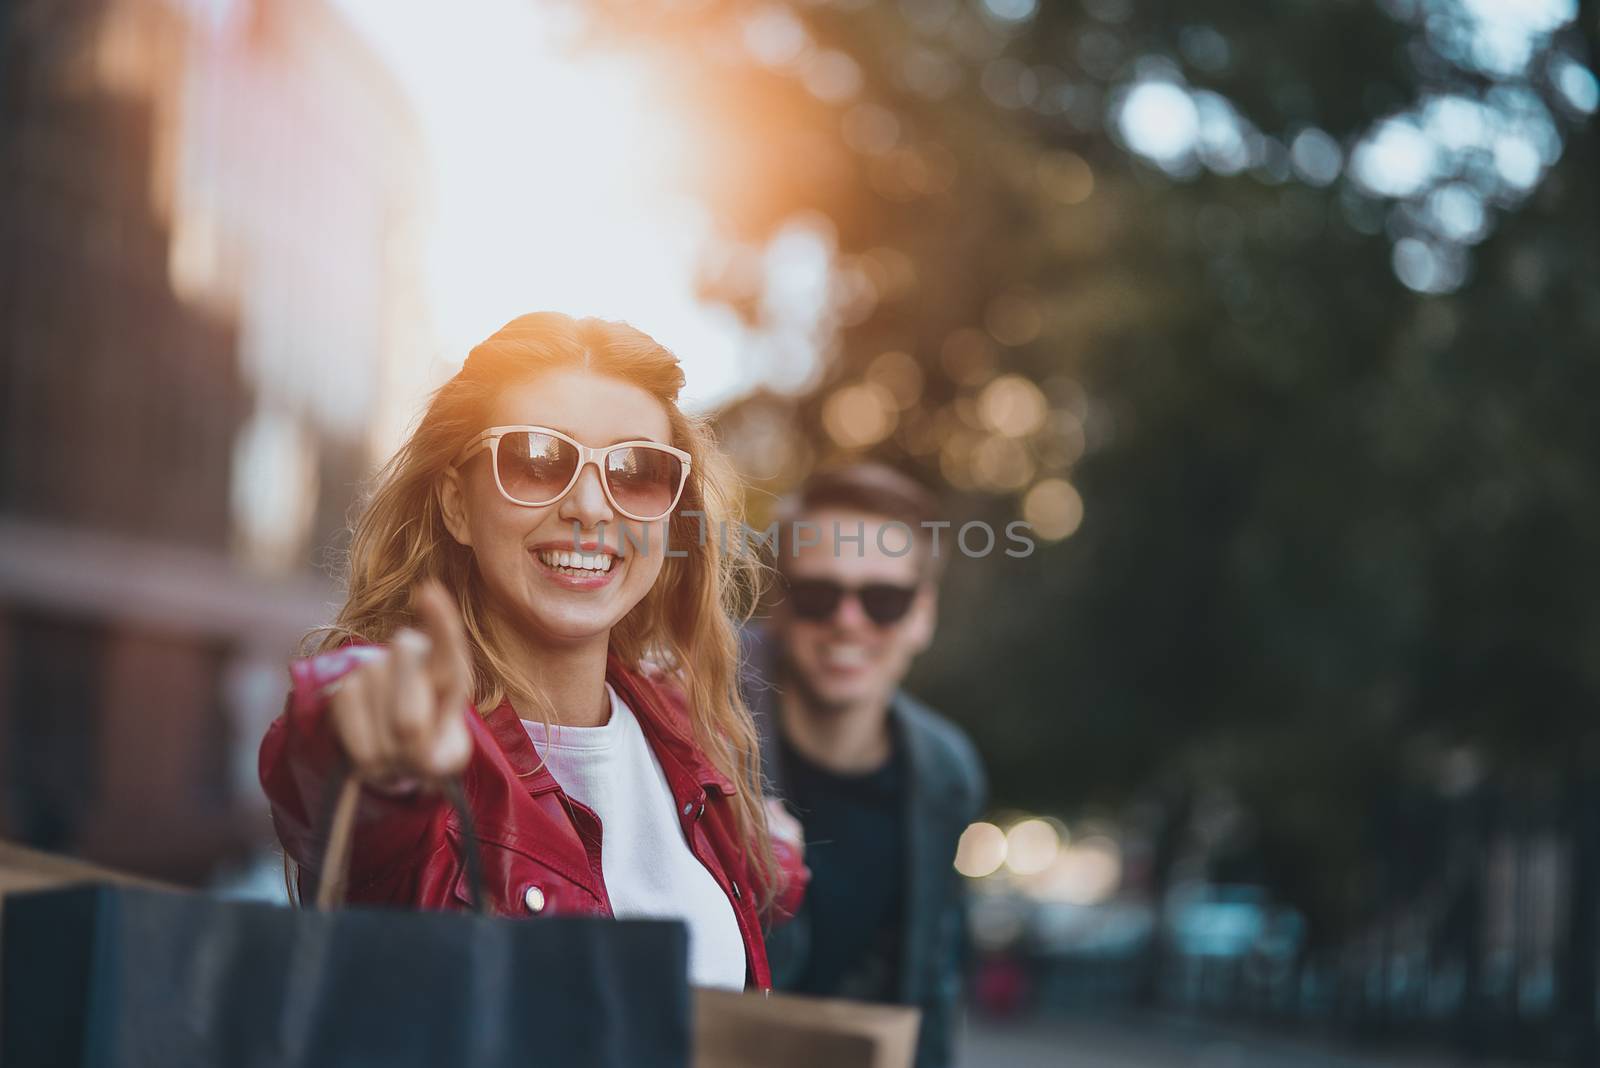 Couple in shopping together. Young couple holding hands and running through street.